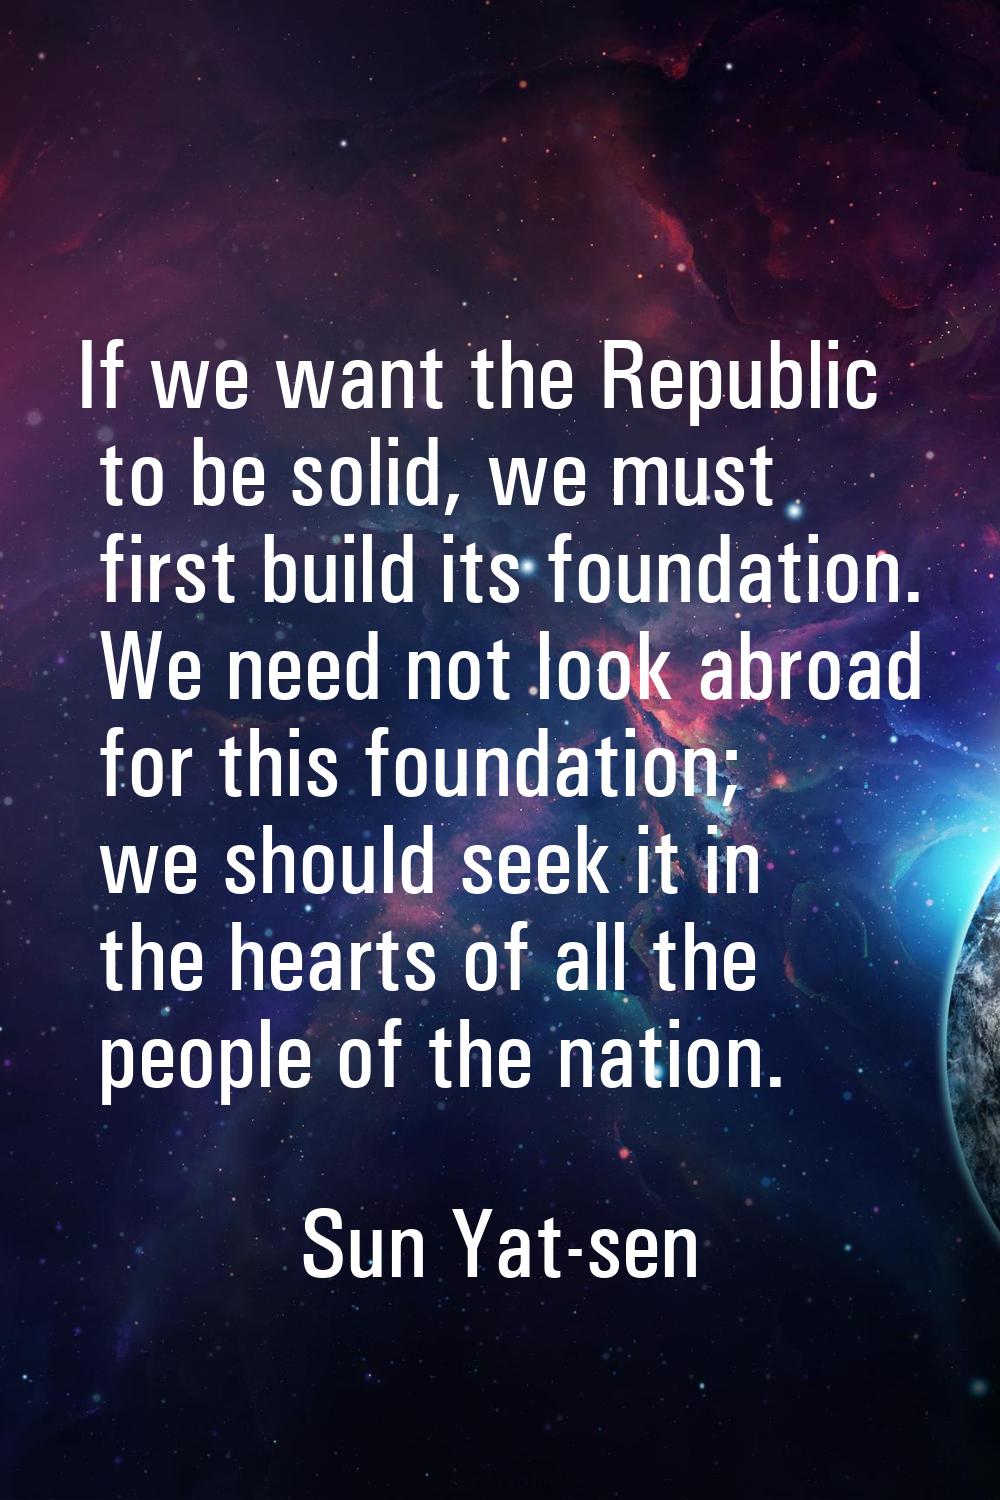 If we want the Republic to be solid, we must first build its foundation. We need not look abroad fo